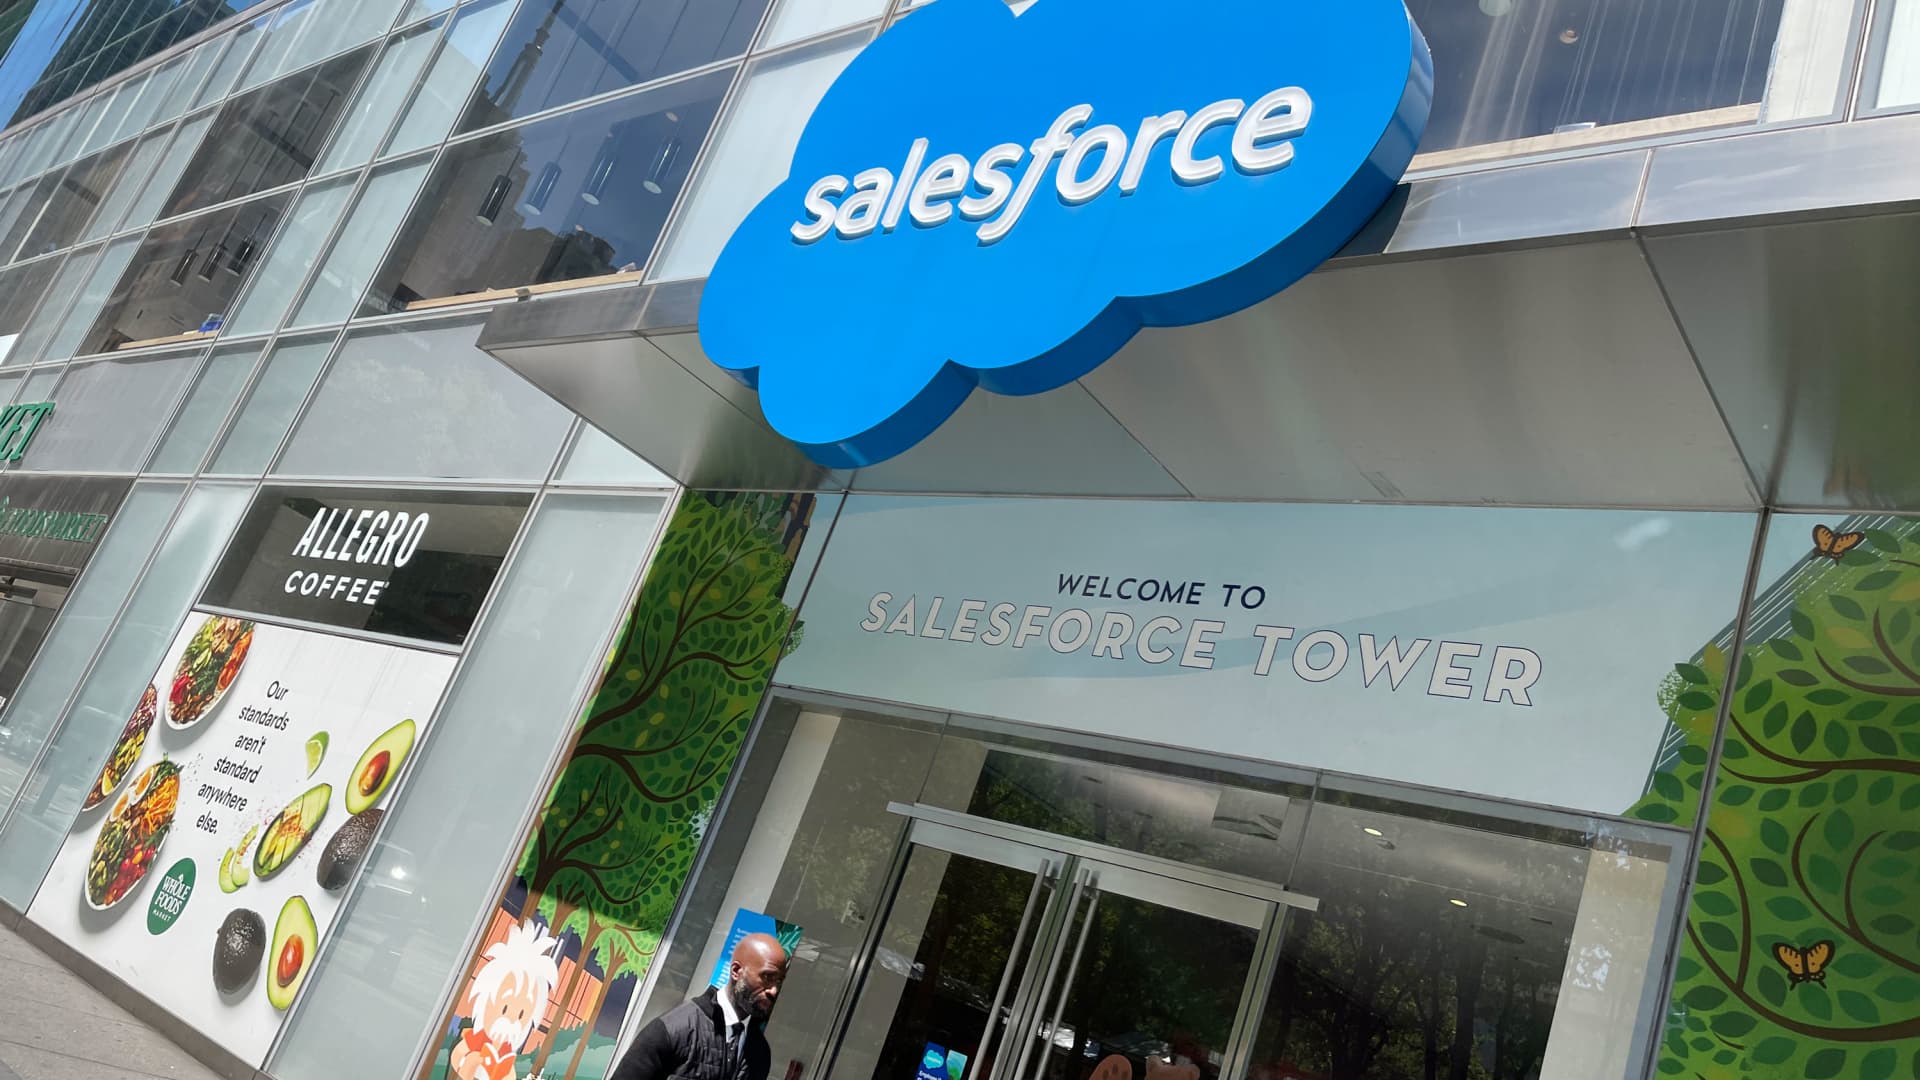 Salesforce signage outside office building in New York.